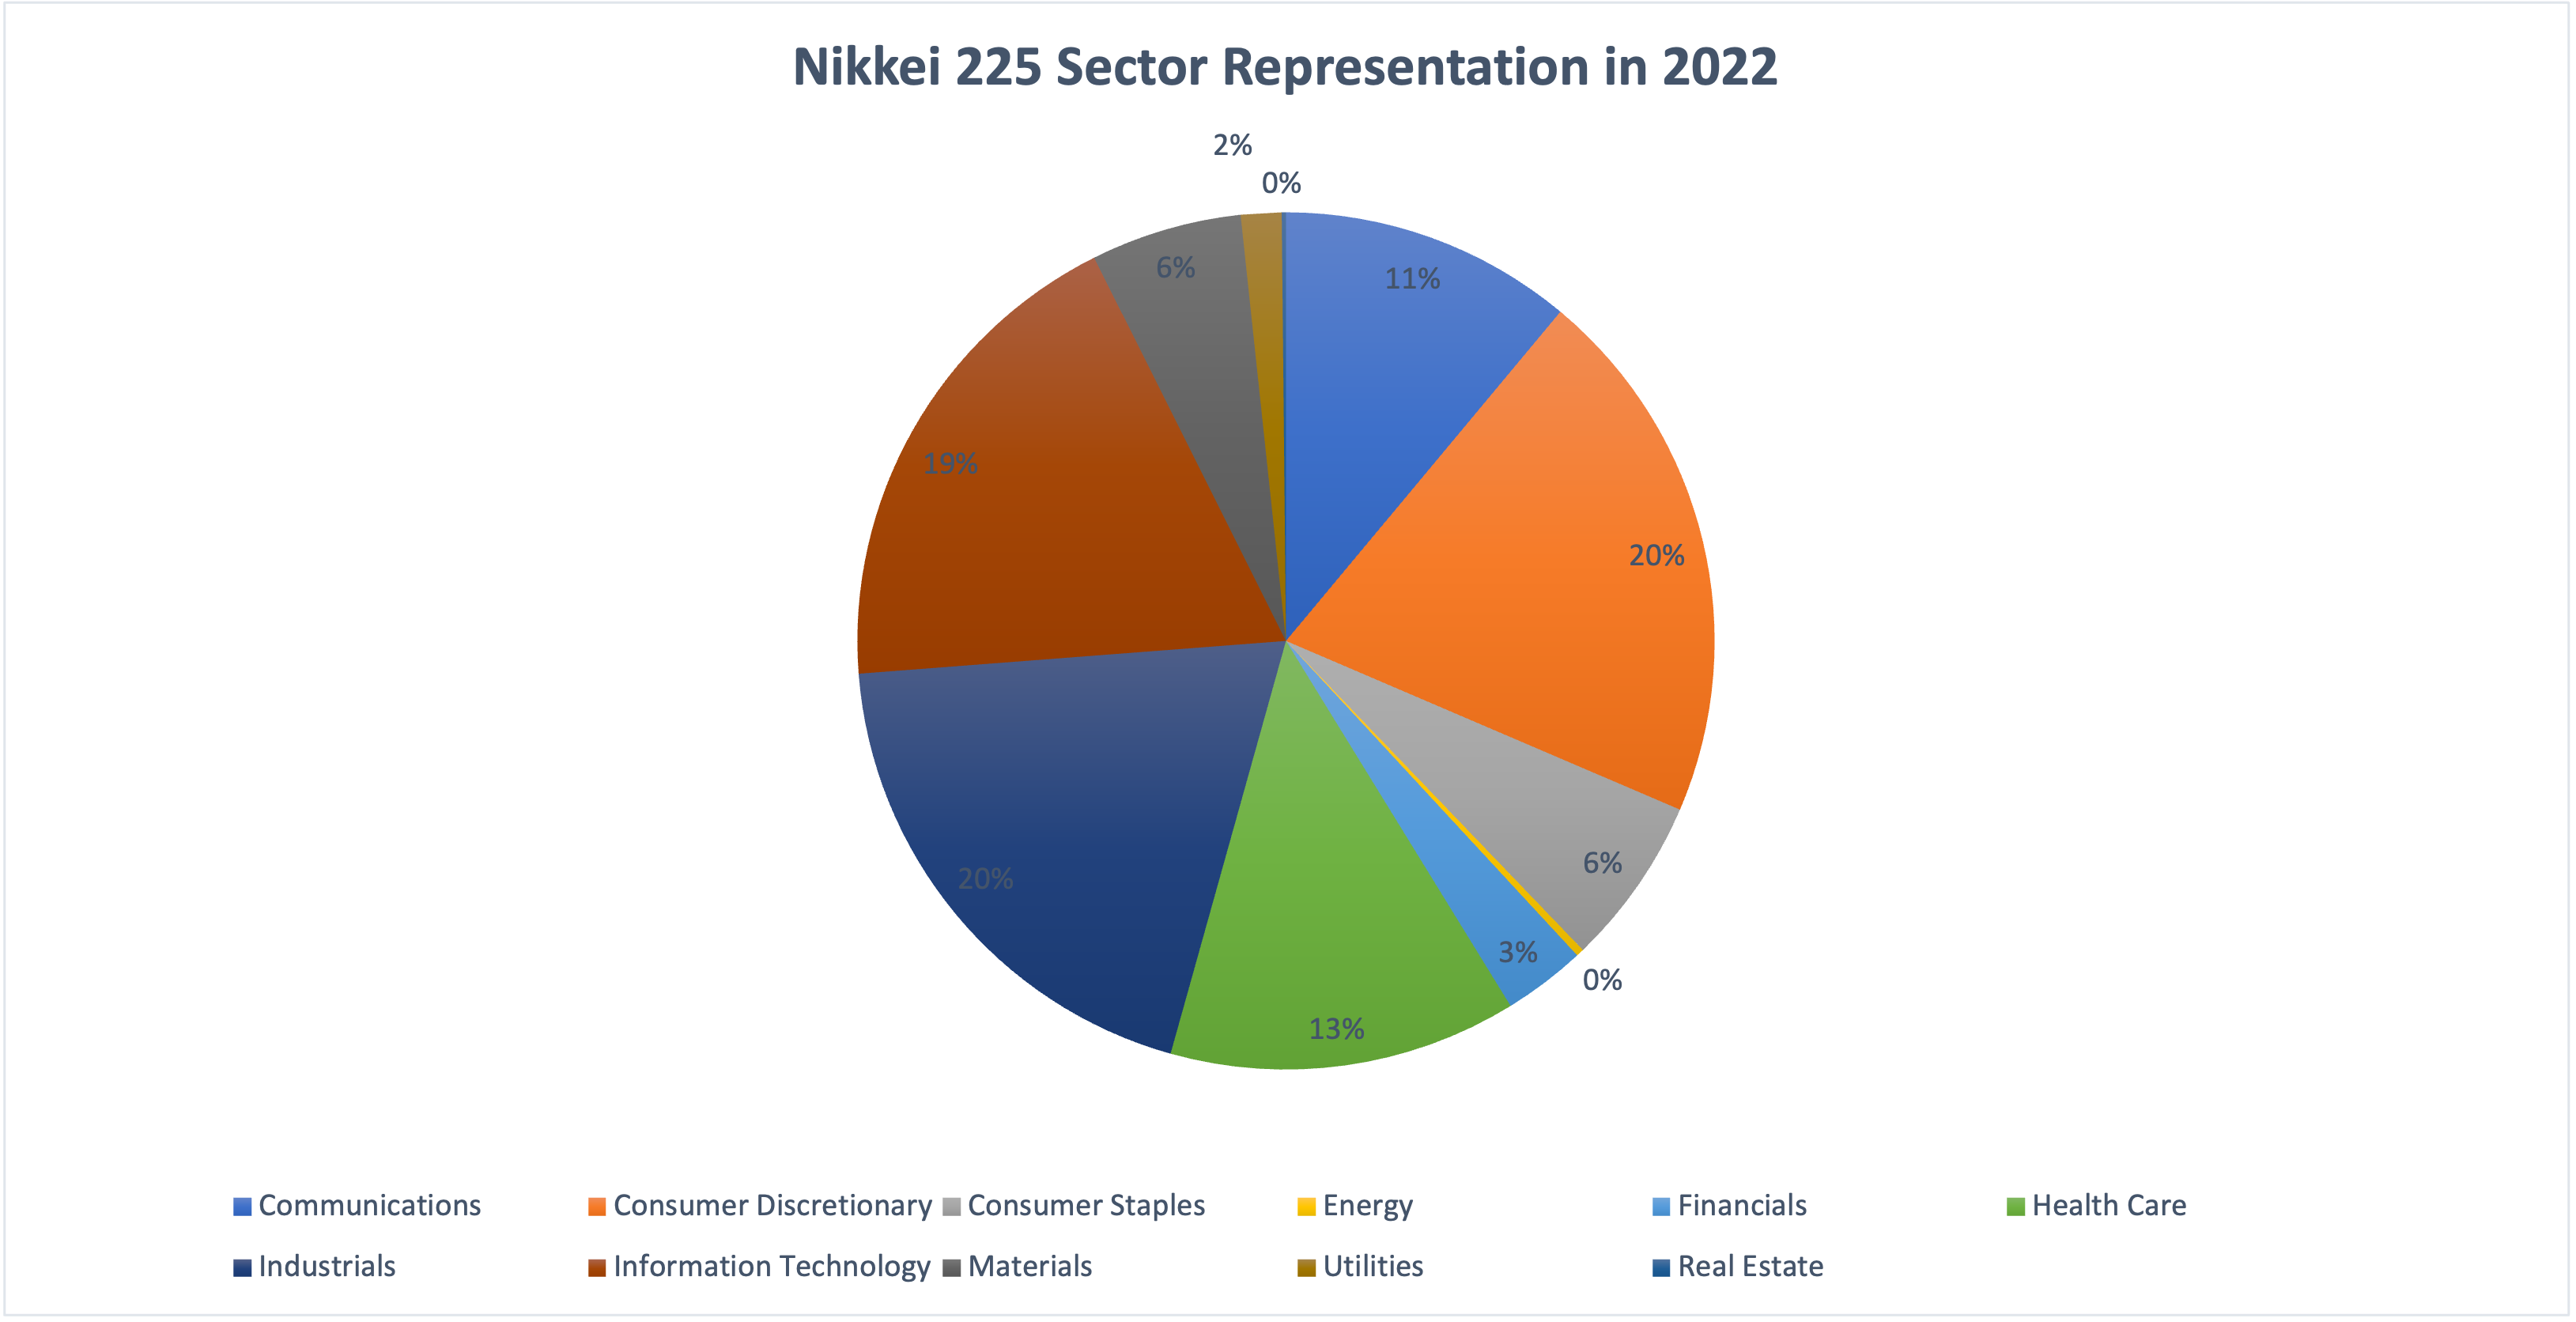 Sector representation in the Nikkei 225 index